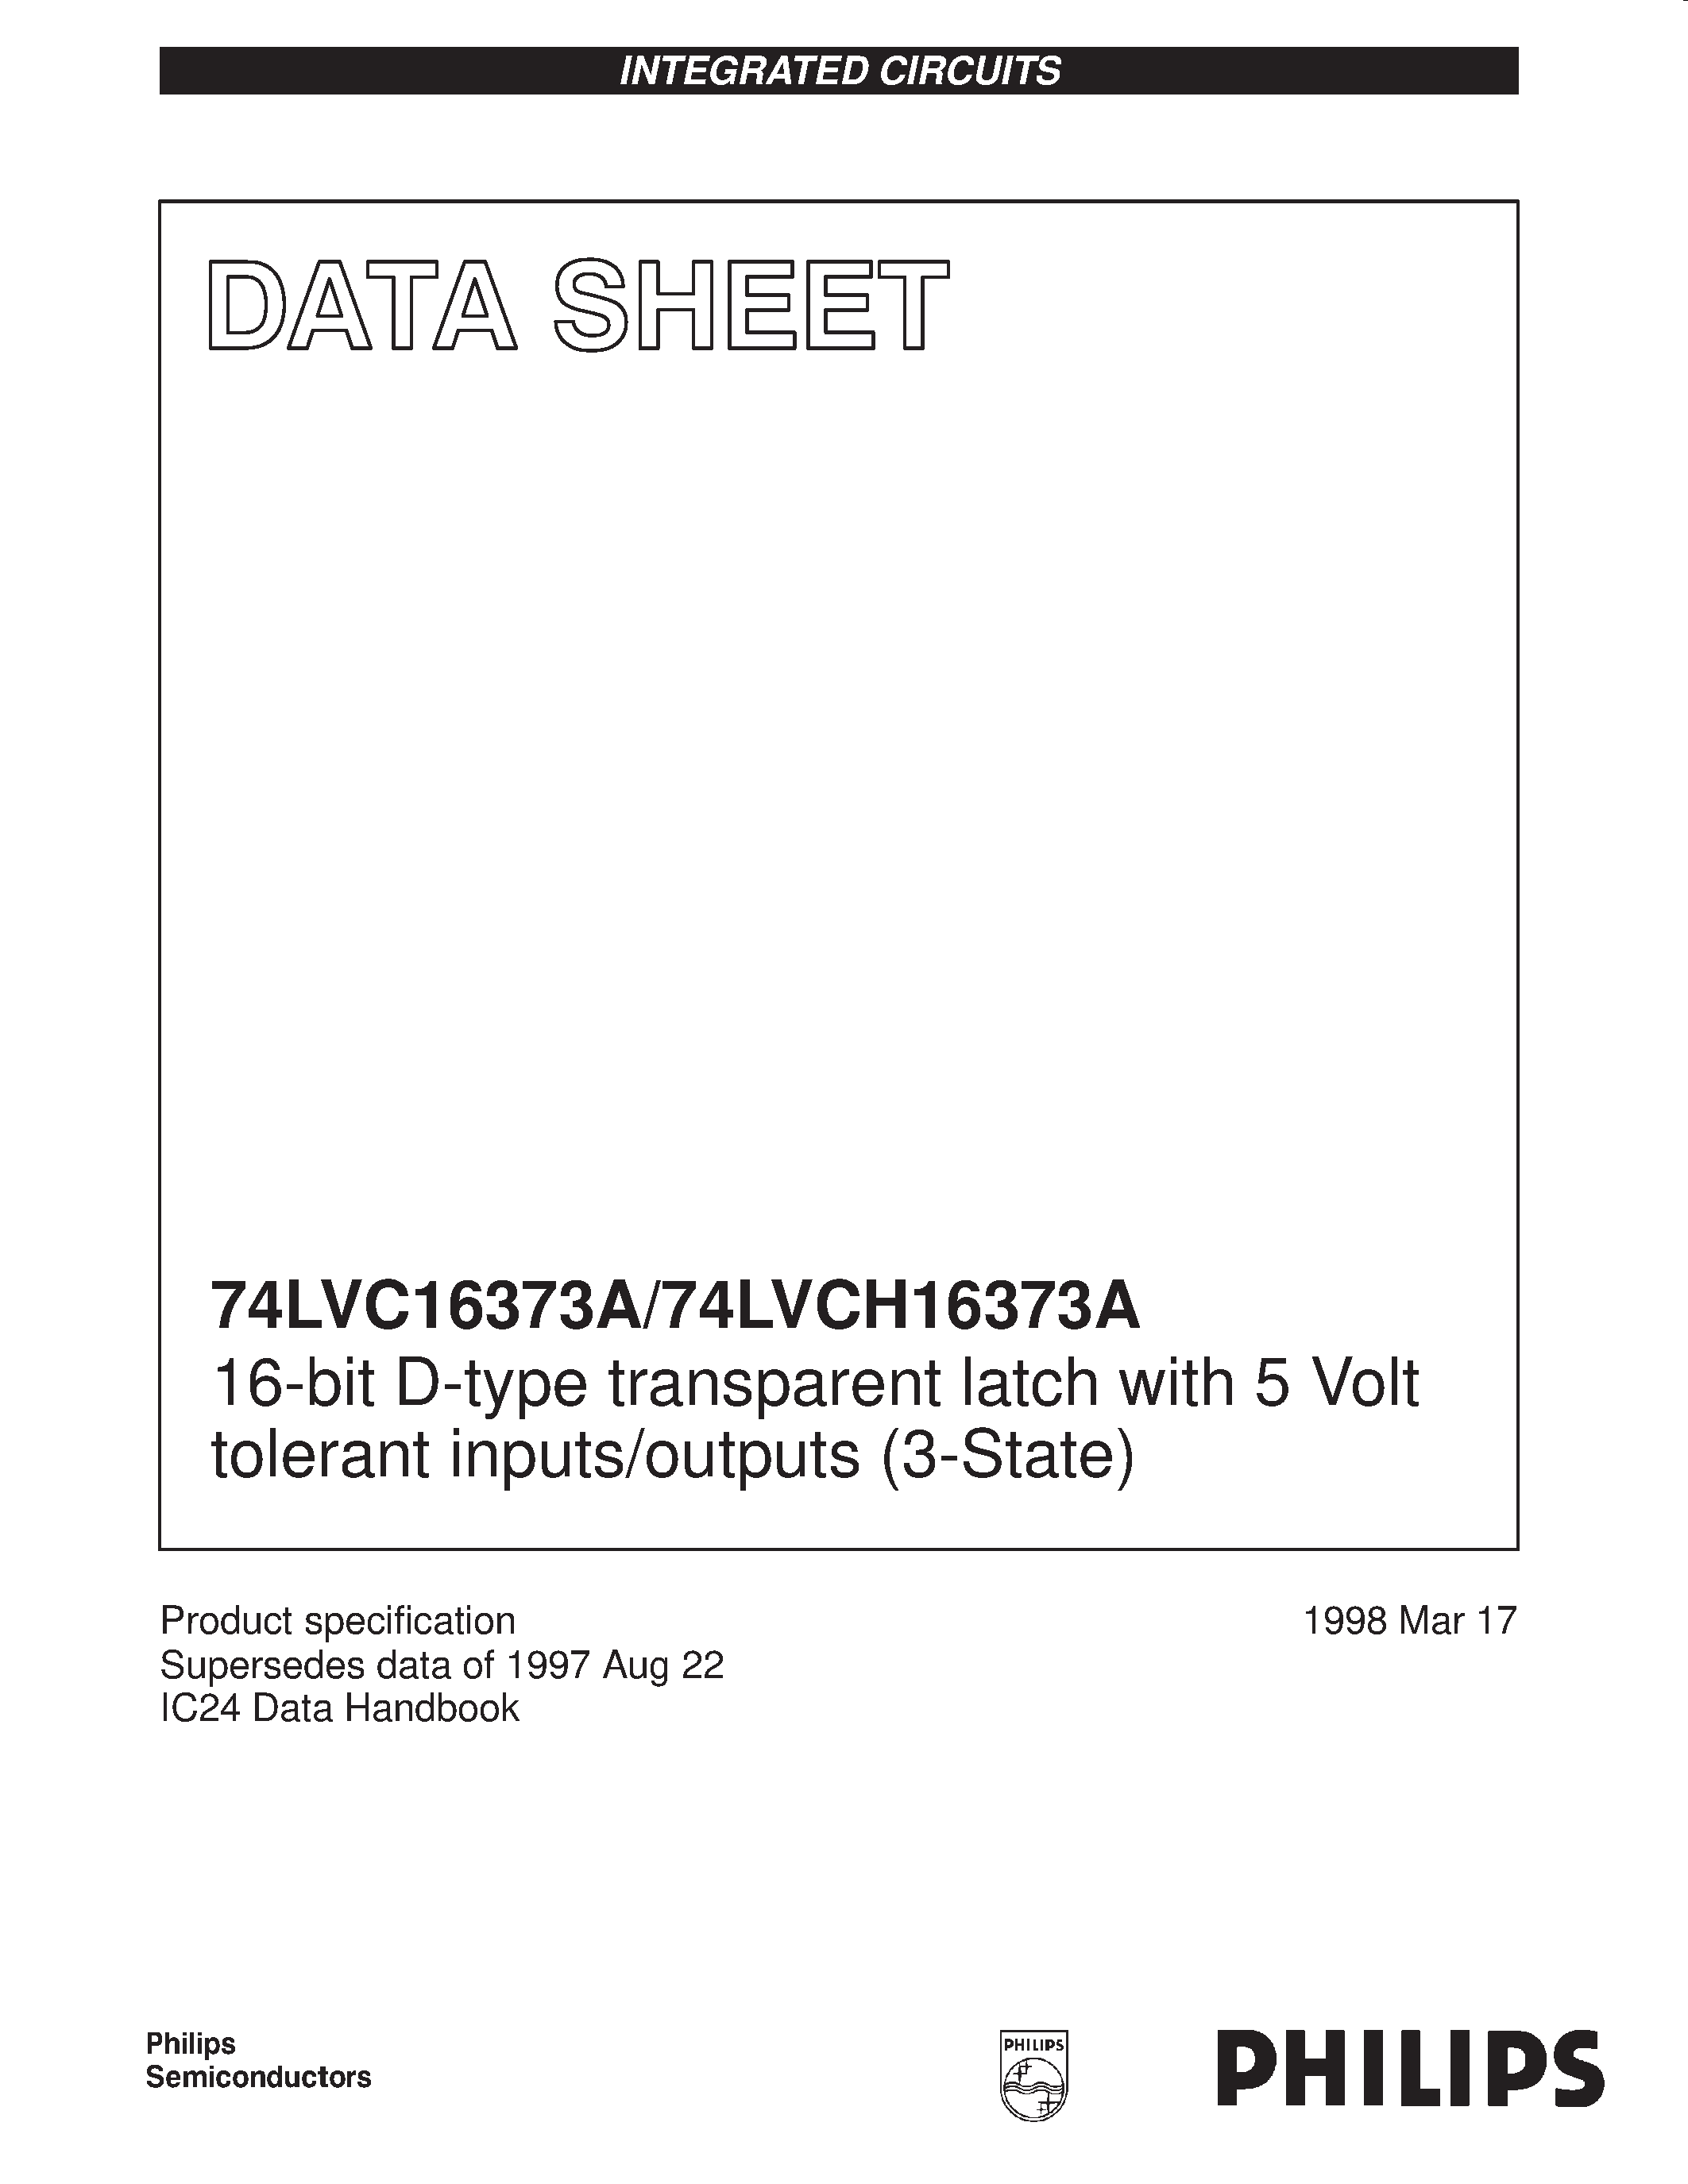 Datasheet VCH16373ADGG - 16-bit D-type transparent latch with 5 Volt tolerant inputs/outputs 3-State page 1